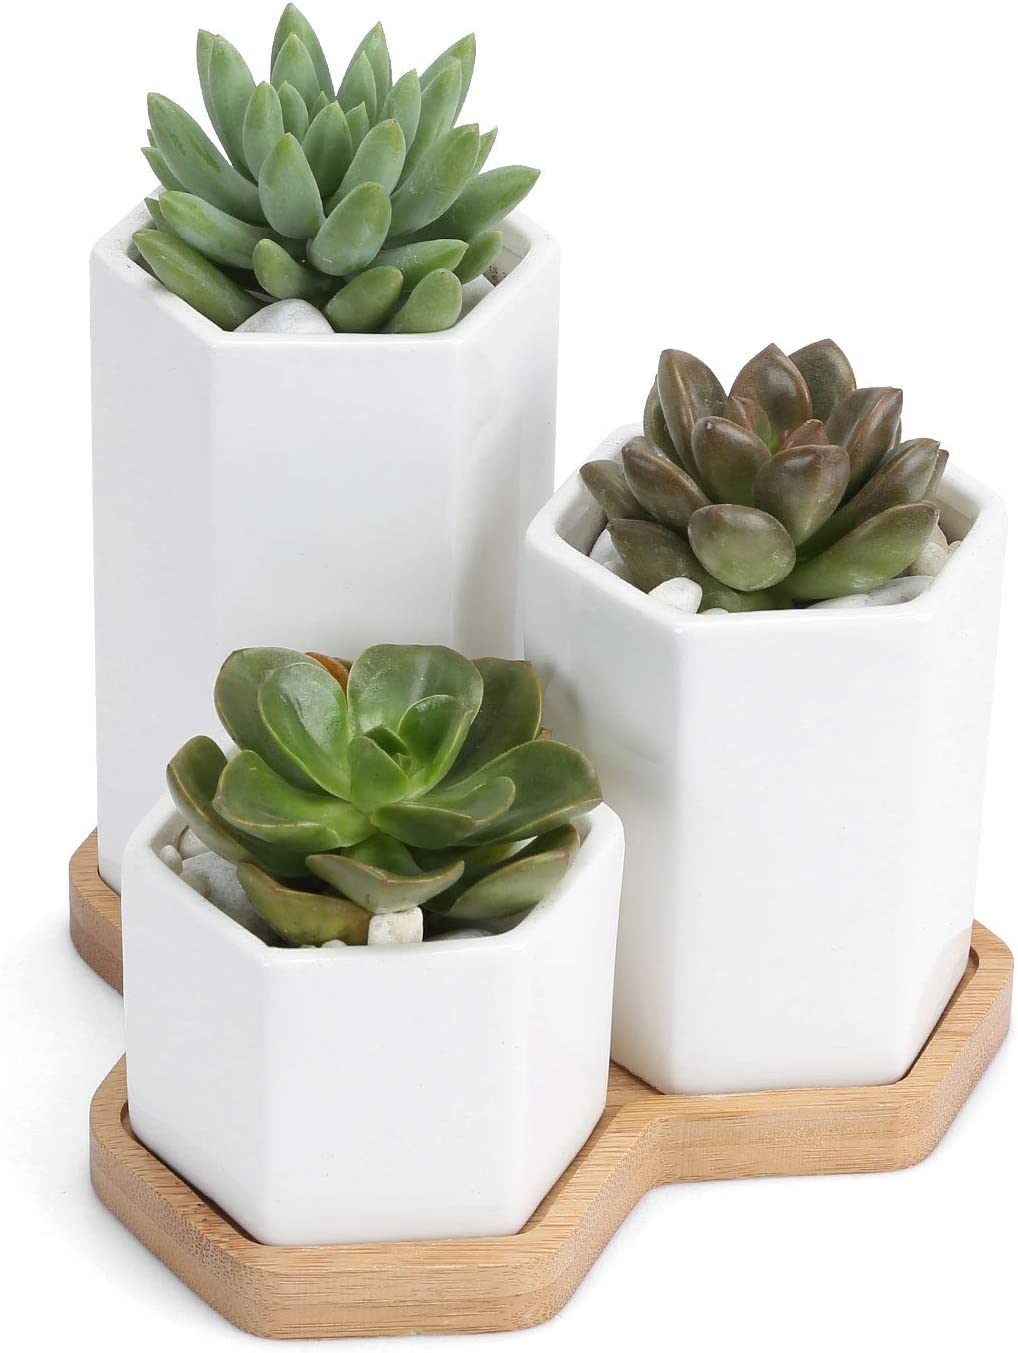 inexpensive-gifts-for-coworkers-succulents